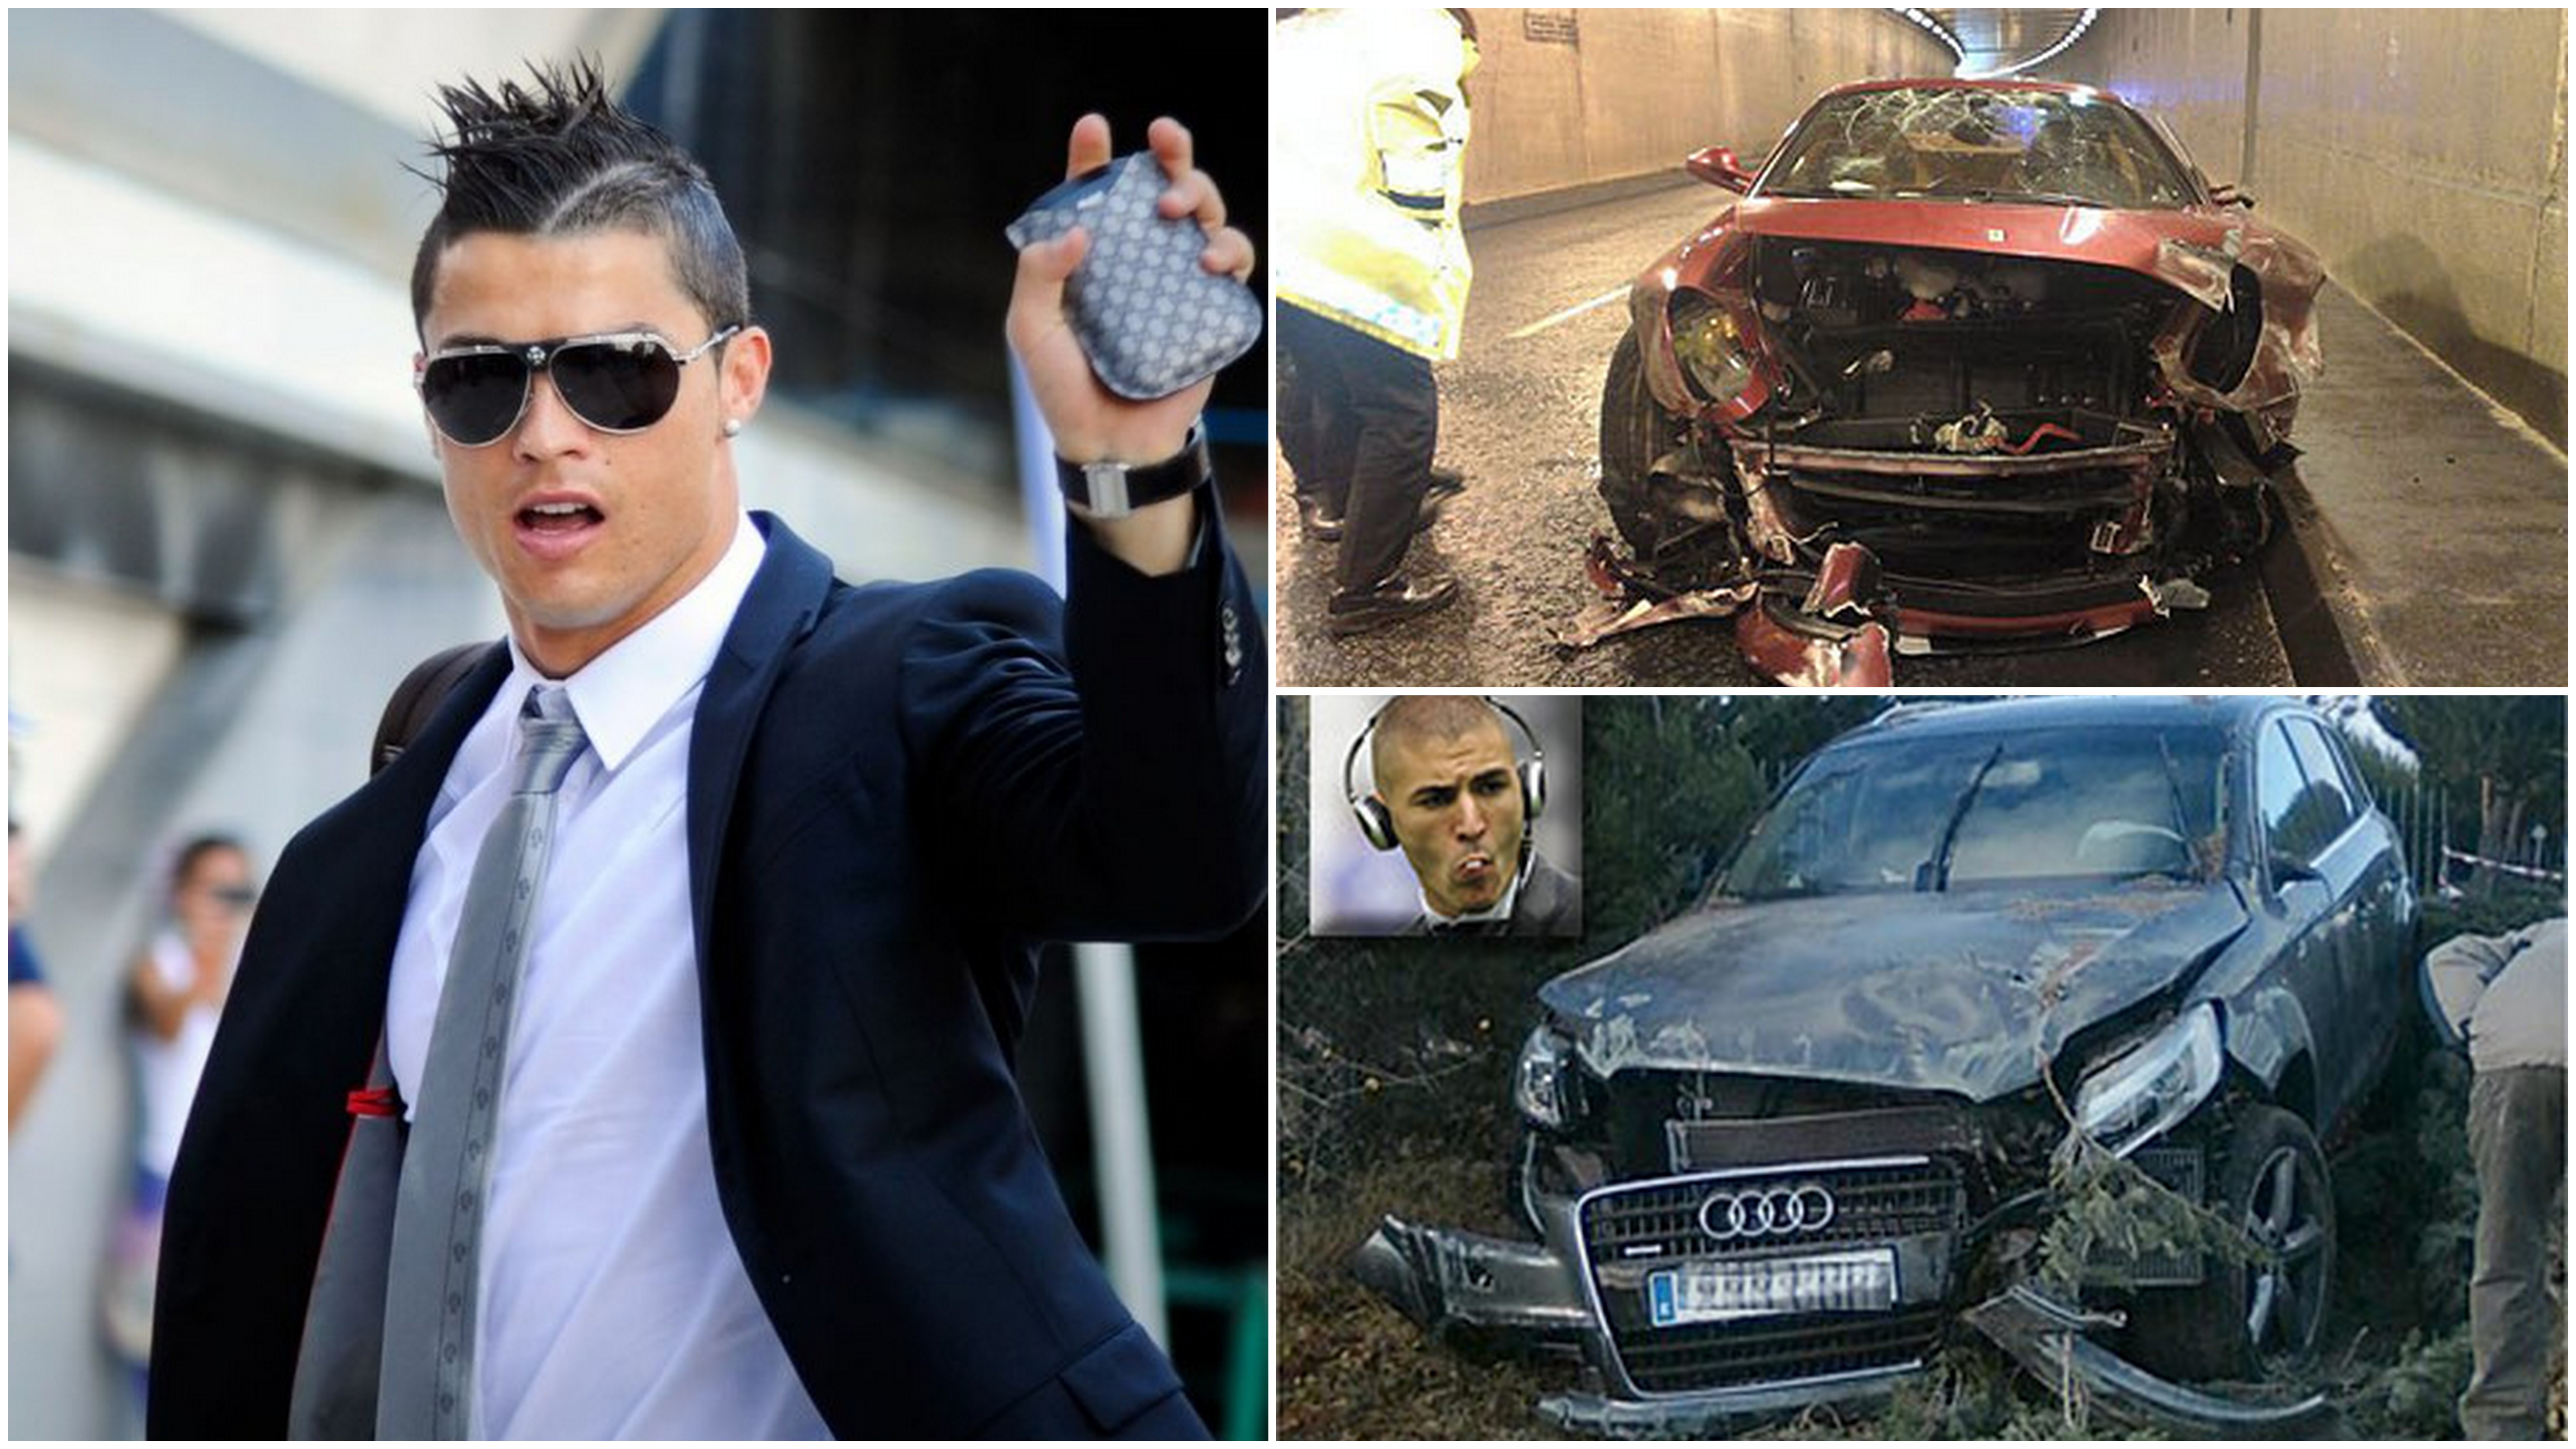 10 footballers who were involved in car accidents5120 x 2880